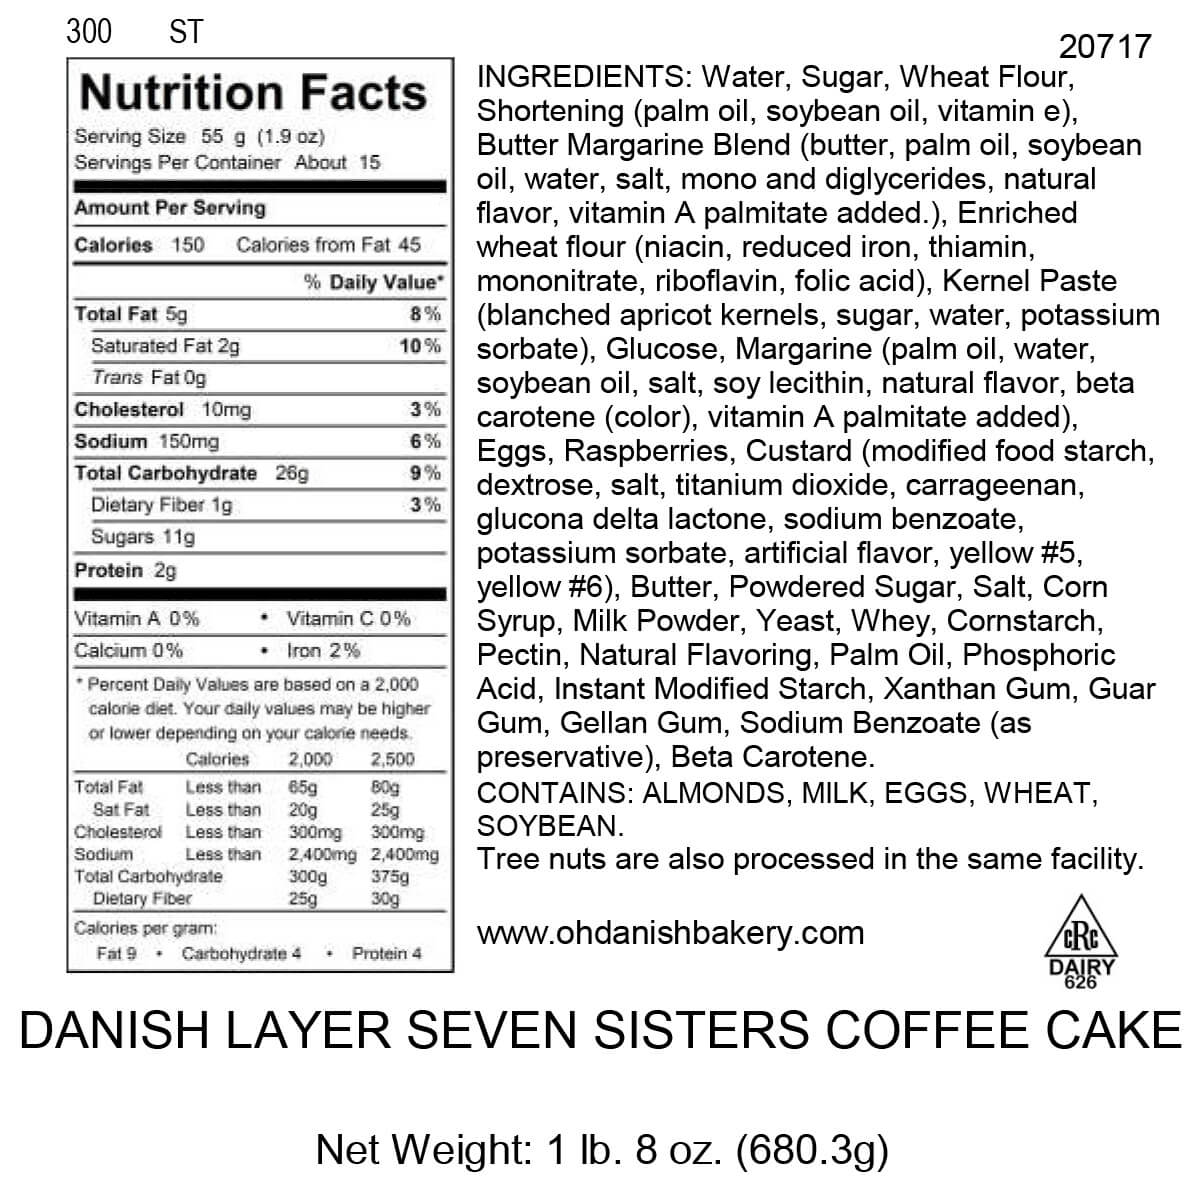 Nutritional Label for Danish Layer Seven Sisters Coffee Cake